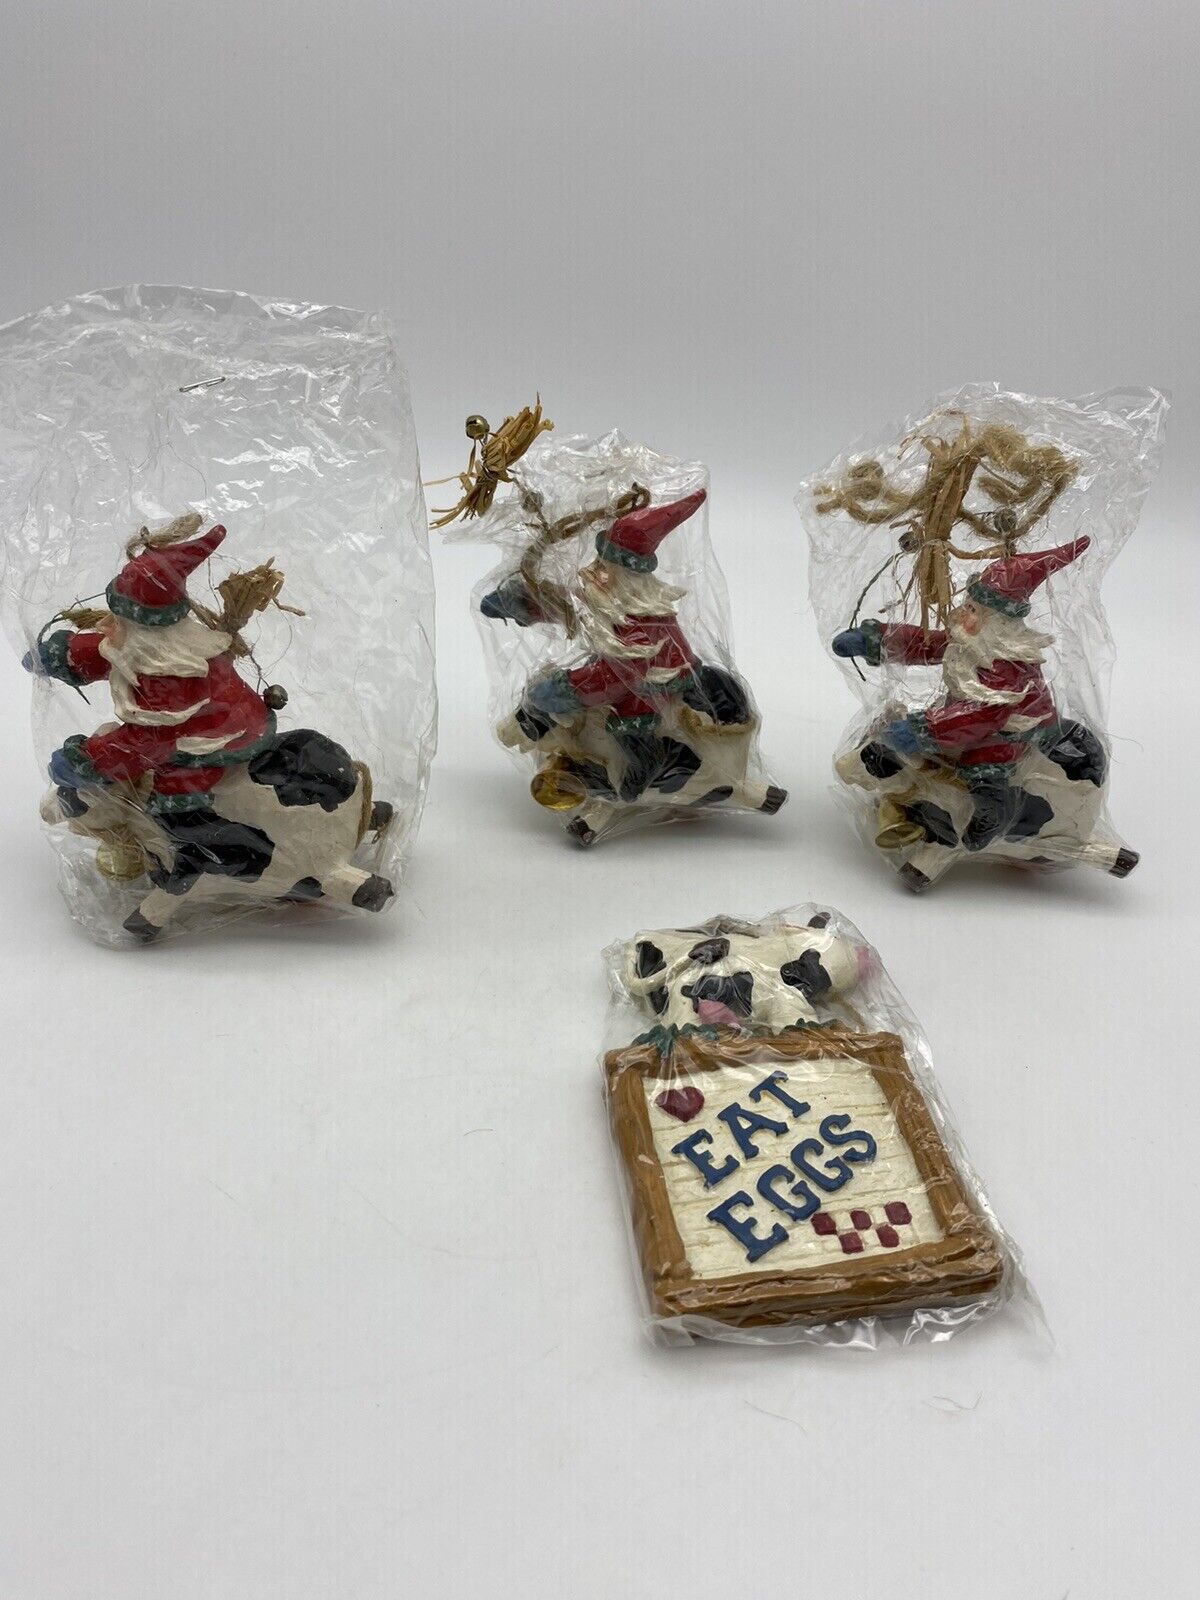 3 Santa Claus Riding Black and White Cow with Bell Ornament & Eat Eggs Ornament